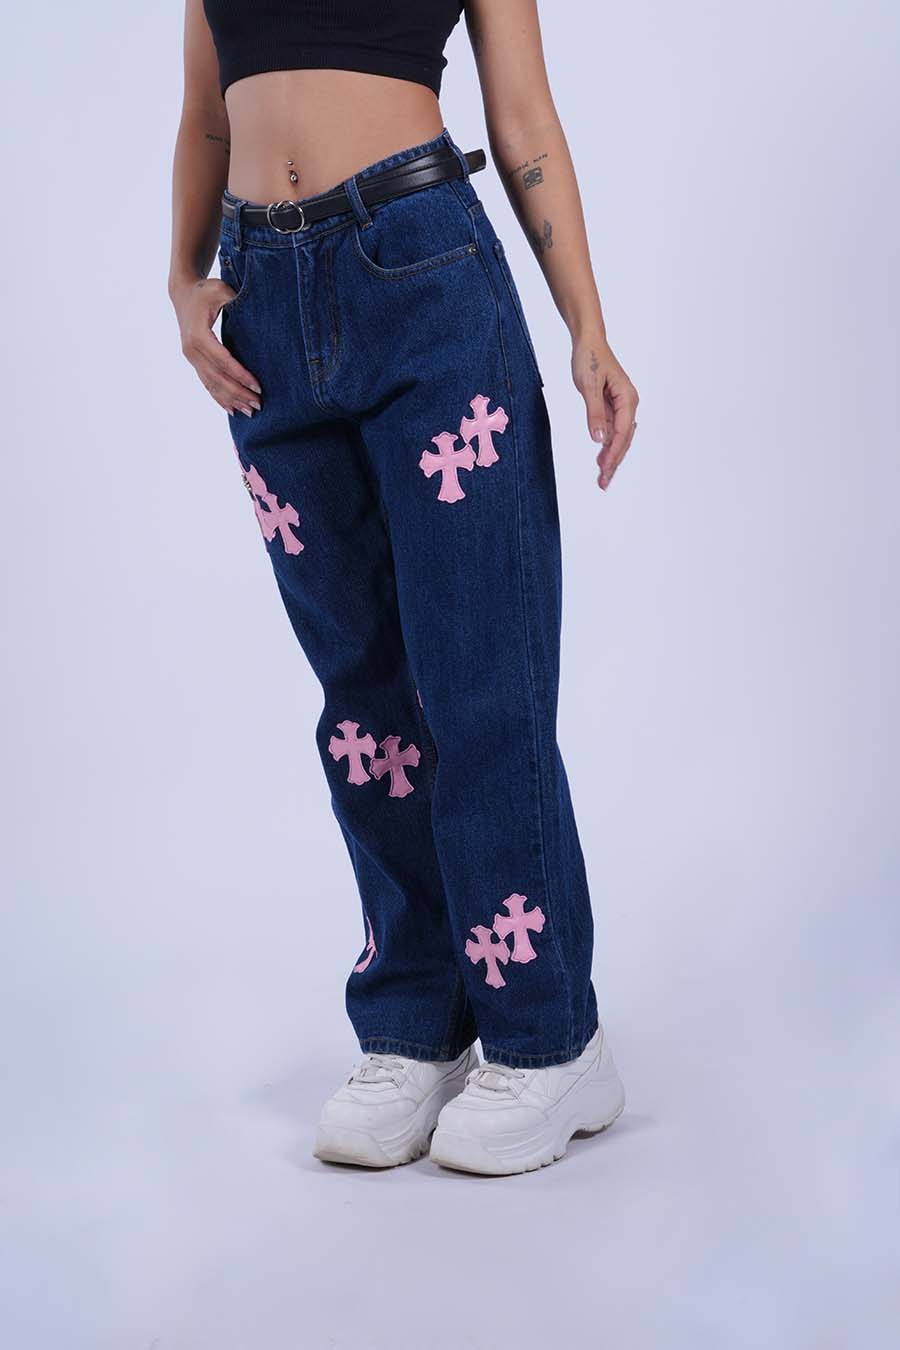 PINK LEATHER CROSS VALKYRE JEANS